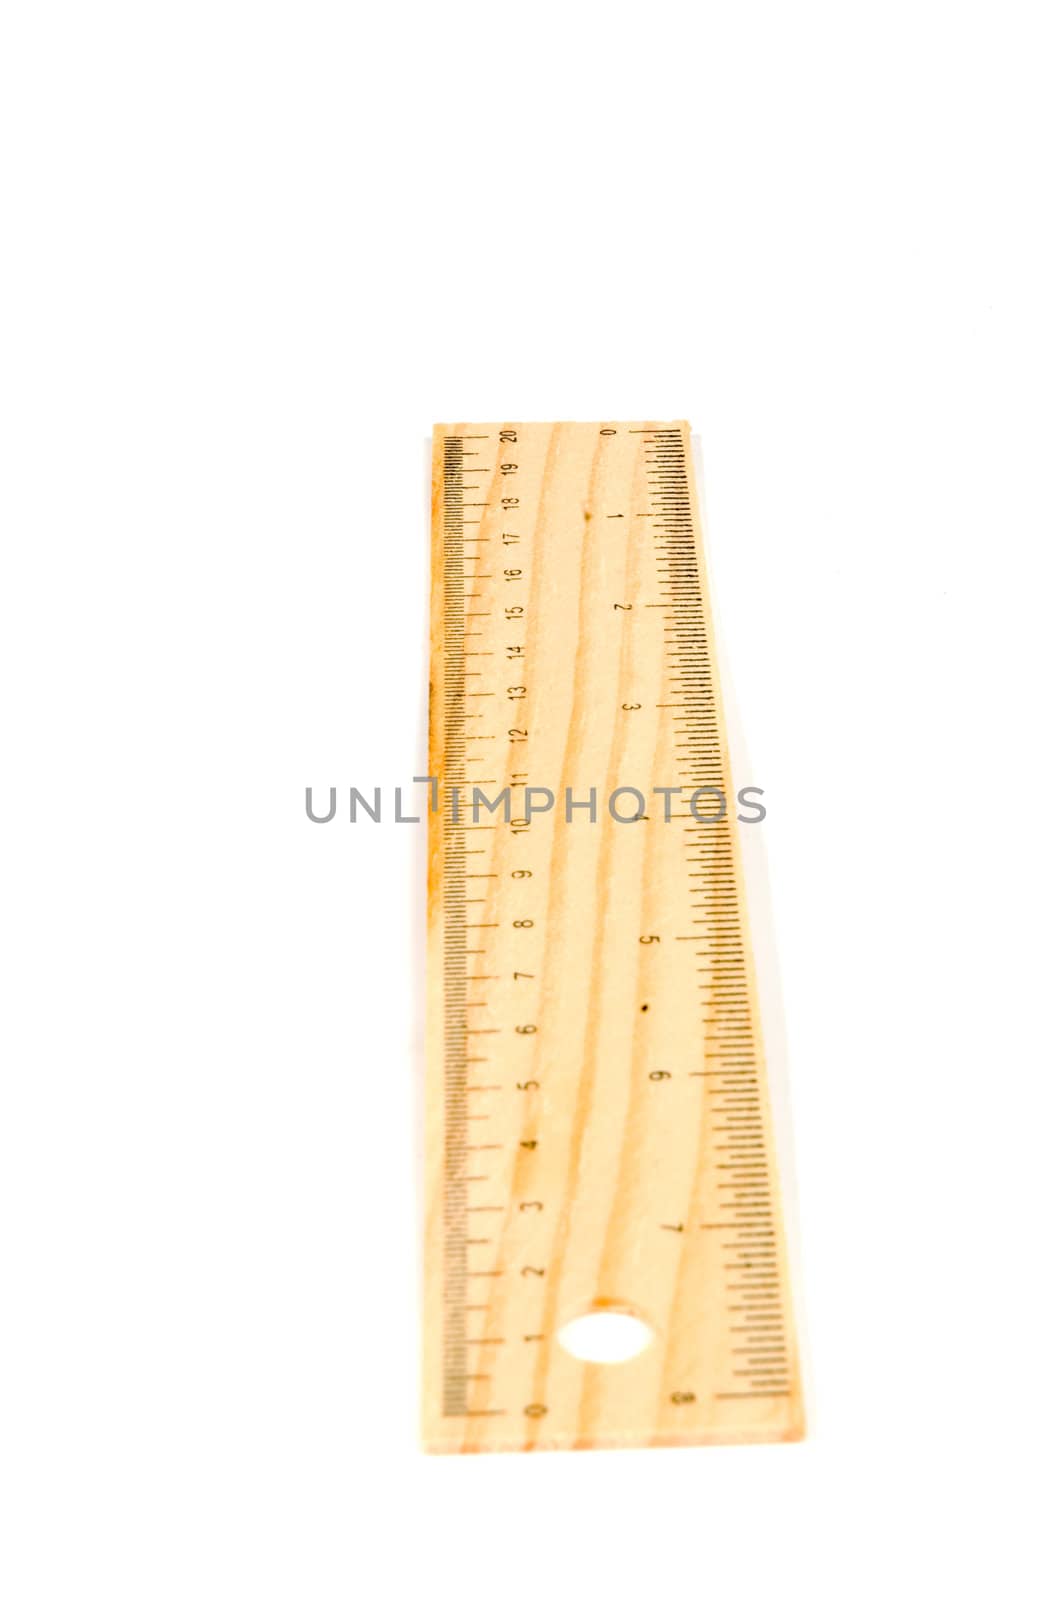 A 20 cm wooden ruler, isolated on a white background.Flip it over for a 8 inch ruler (clearpoint at 20 cm)